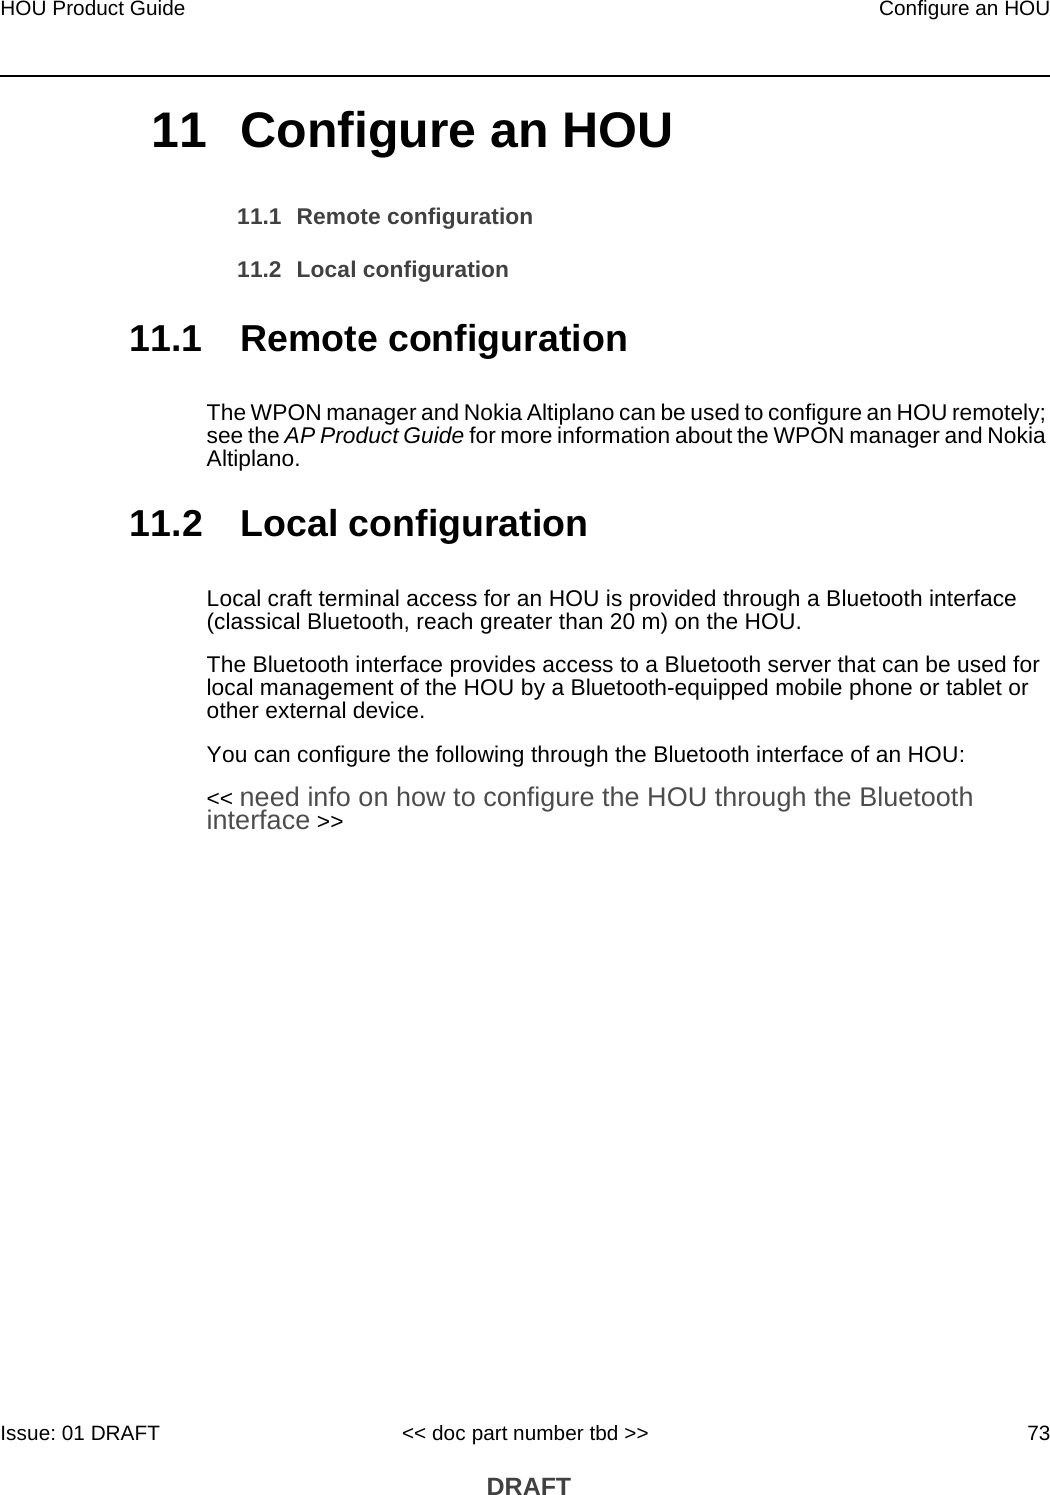 HOU Product Guide Configure an HOUIssue: 01 DRAFT &lt;&lt; doc part number tbd &gt;&gt; 73 DRAFT11 Configure an HOU11.1 Remote configuration11.2 Local configuration11.1 Remote configurationThe WPON manager and Nokia Altiplano can be used to configure an HOU remotely; see the AP Product Guide for more information about the WPON manager and Nokia Altiplano. 11.2 Local configurationLocal craft terminal access for an HOU is provided through a Bluetooth interface (classical Bluetooth, reach greater than 20 m) on the HOU.The Bluetooth interface provides access to a Bluetooth server that can be used for local management of the HOU by a Bluetooth-equipped mobile phone or tablet or other external device. You can configure the following through the Bluetooth interface of an HOU:&lt;&lt; need info on how to configure the HOU through the Bluetooth interface &gt;&gt;